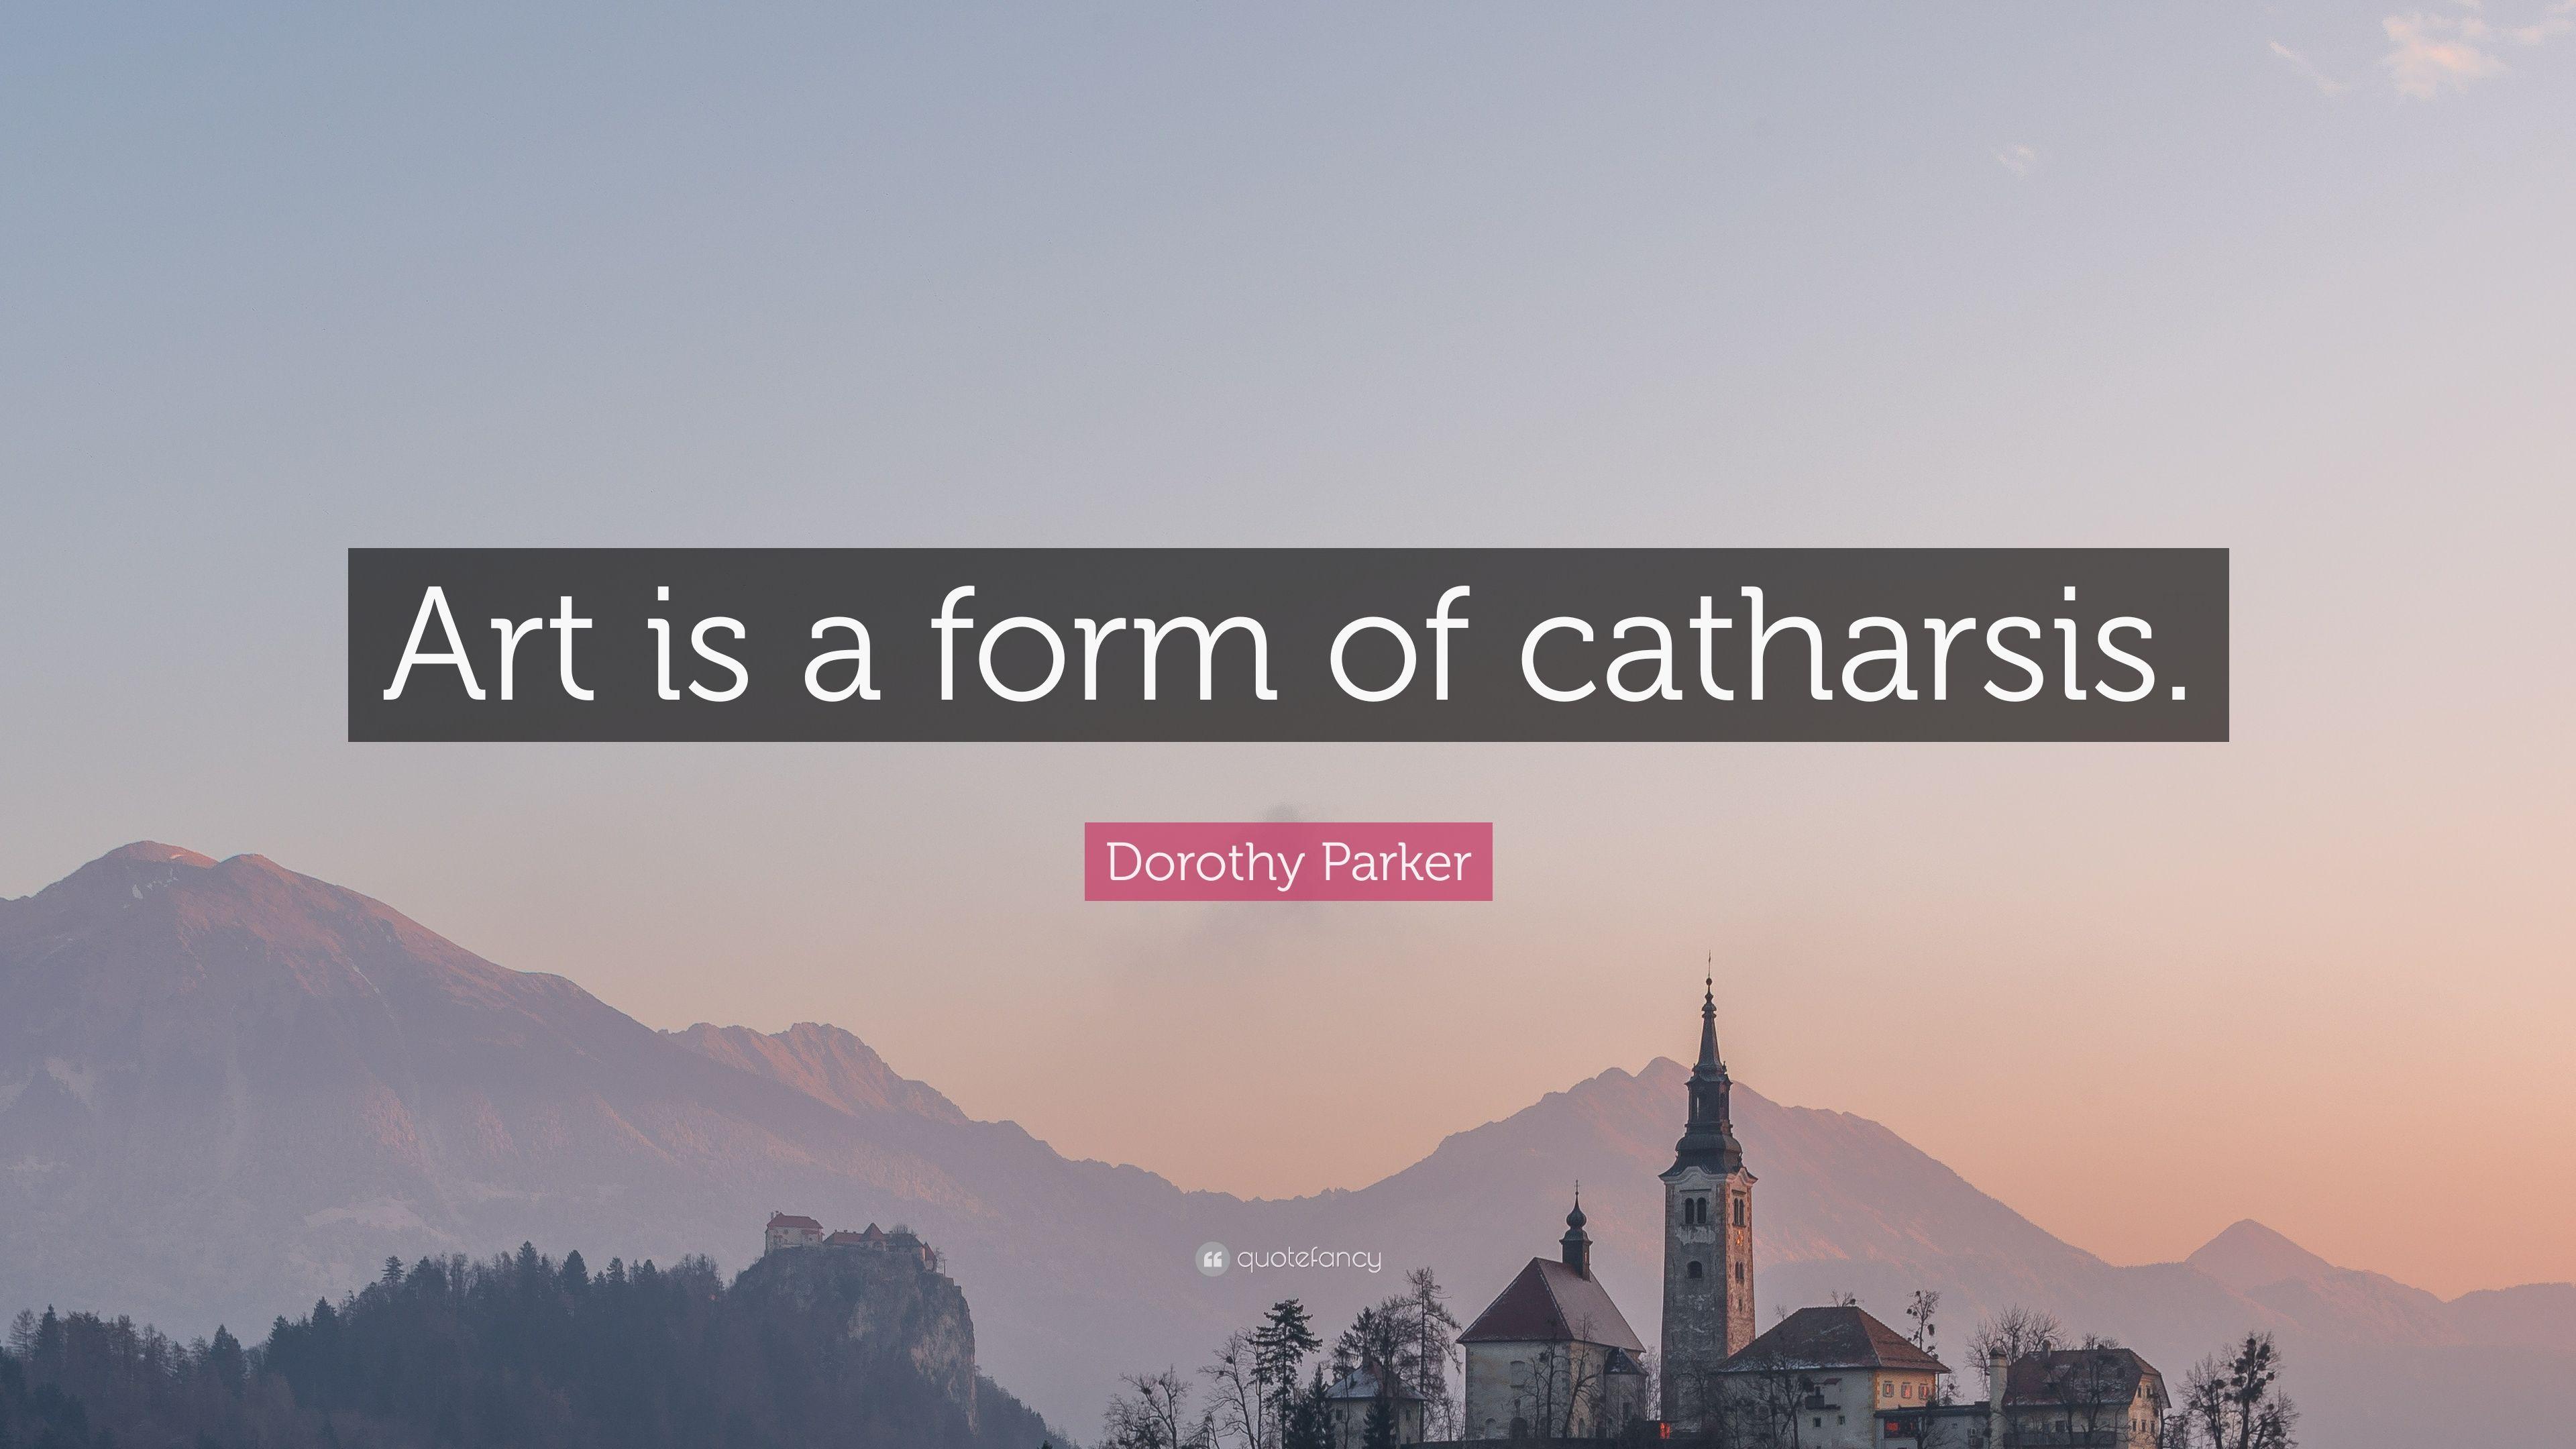 Dorothy Parker Quote: “Art is a form of catharsis.” 7